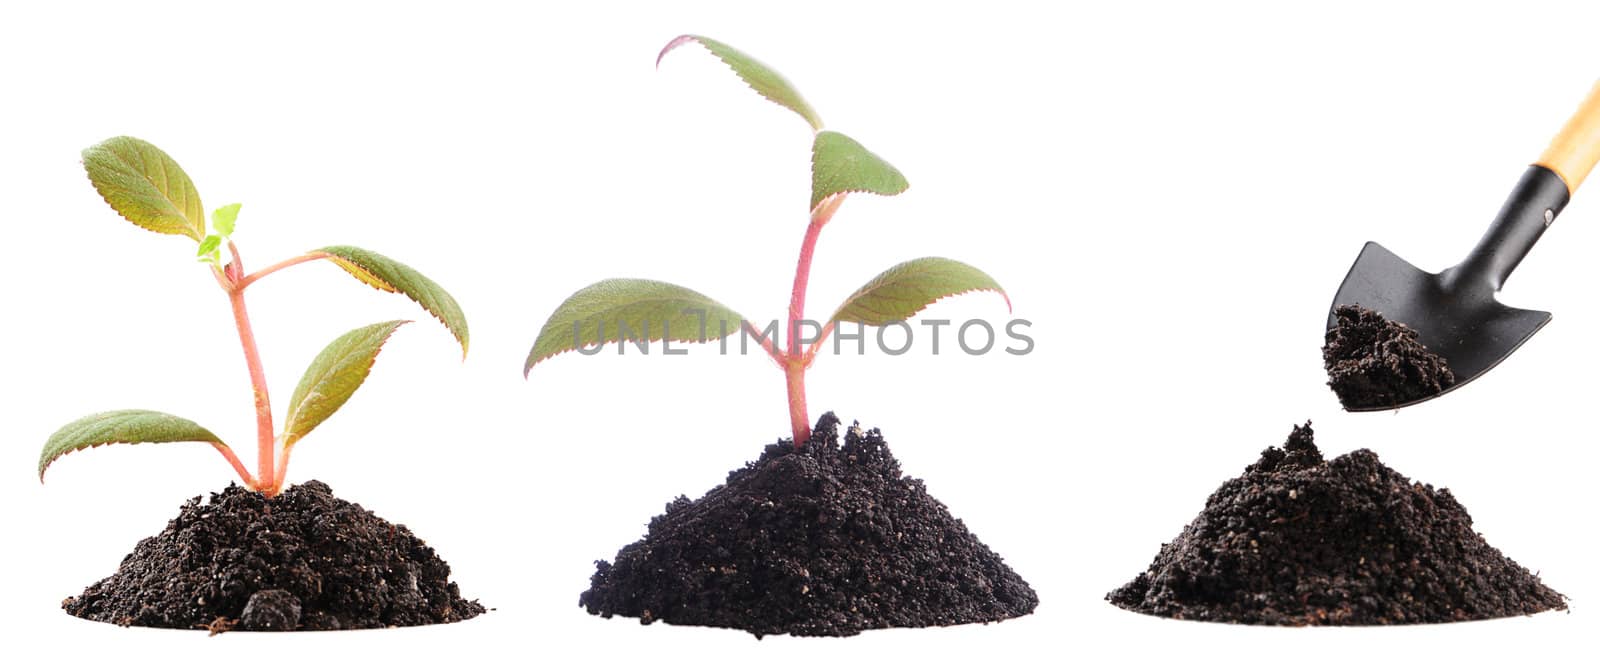 two just planted plants and preparation of soil to landing of the following